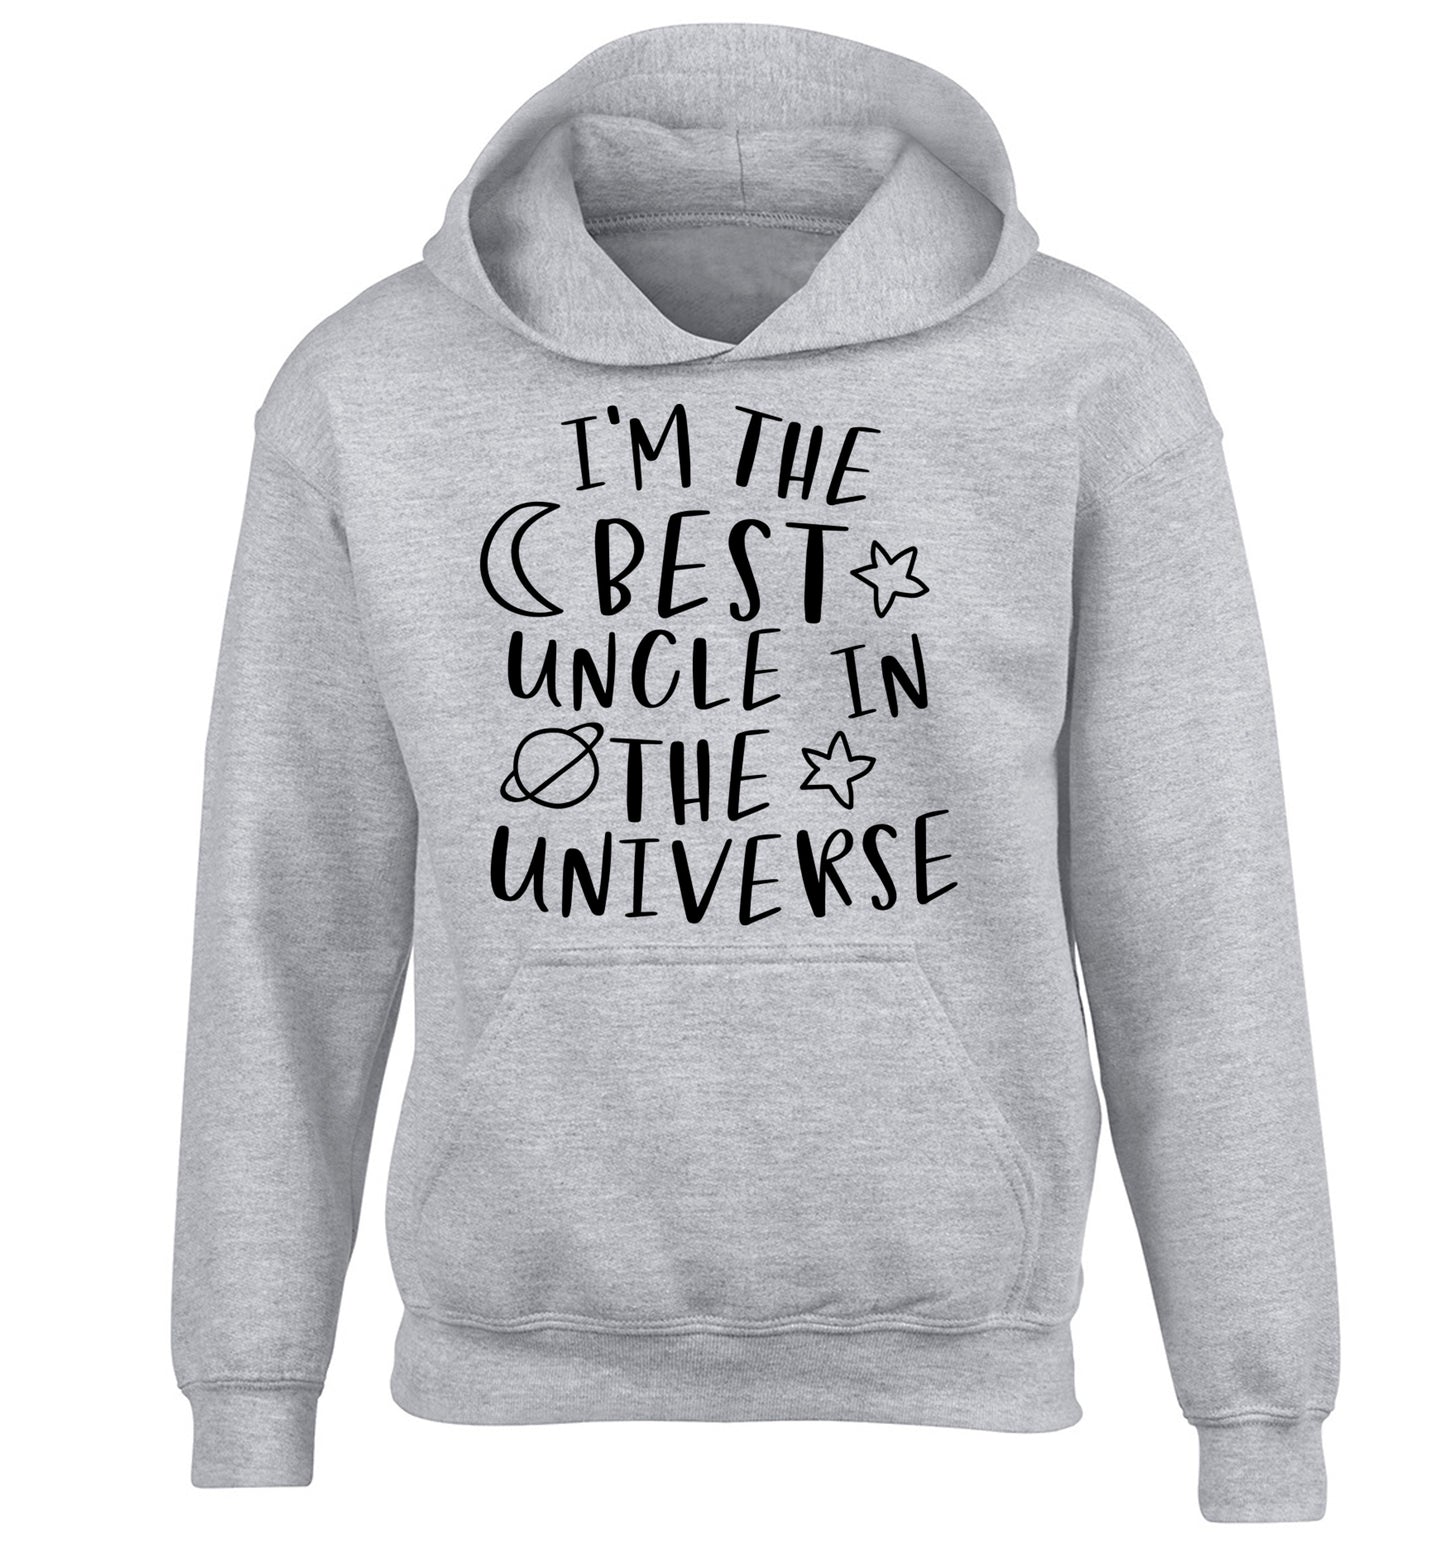 I'm the best uncle in the universe children's grey hoodie 12-13 Years